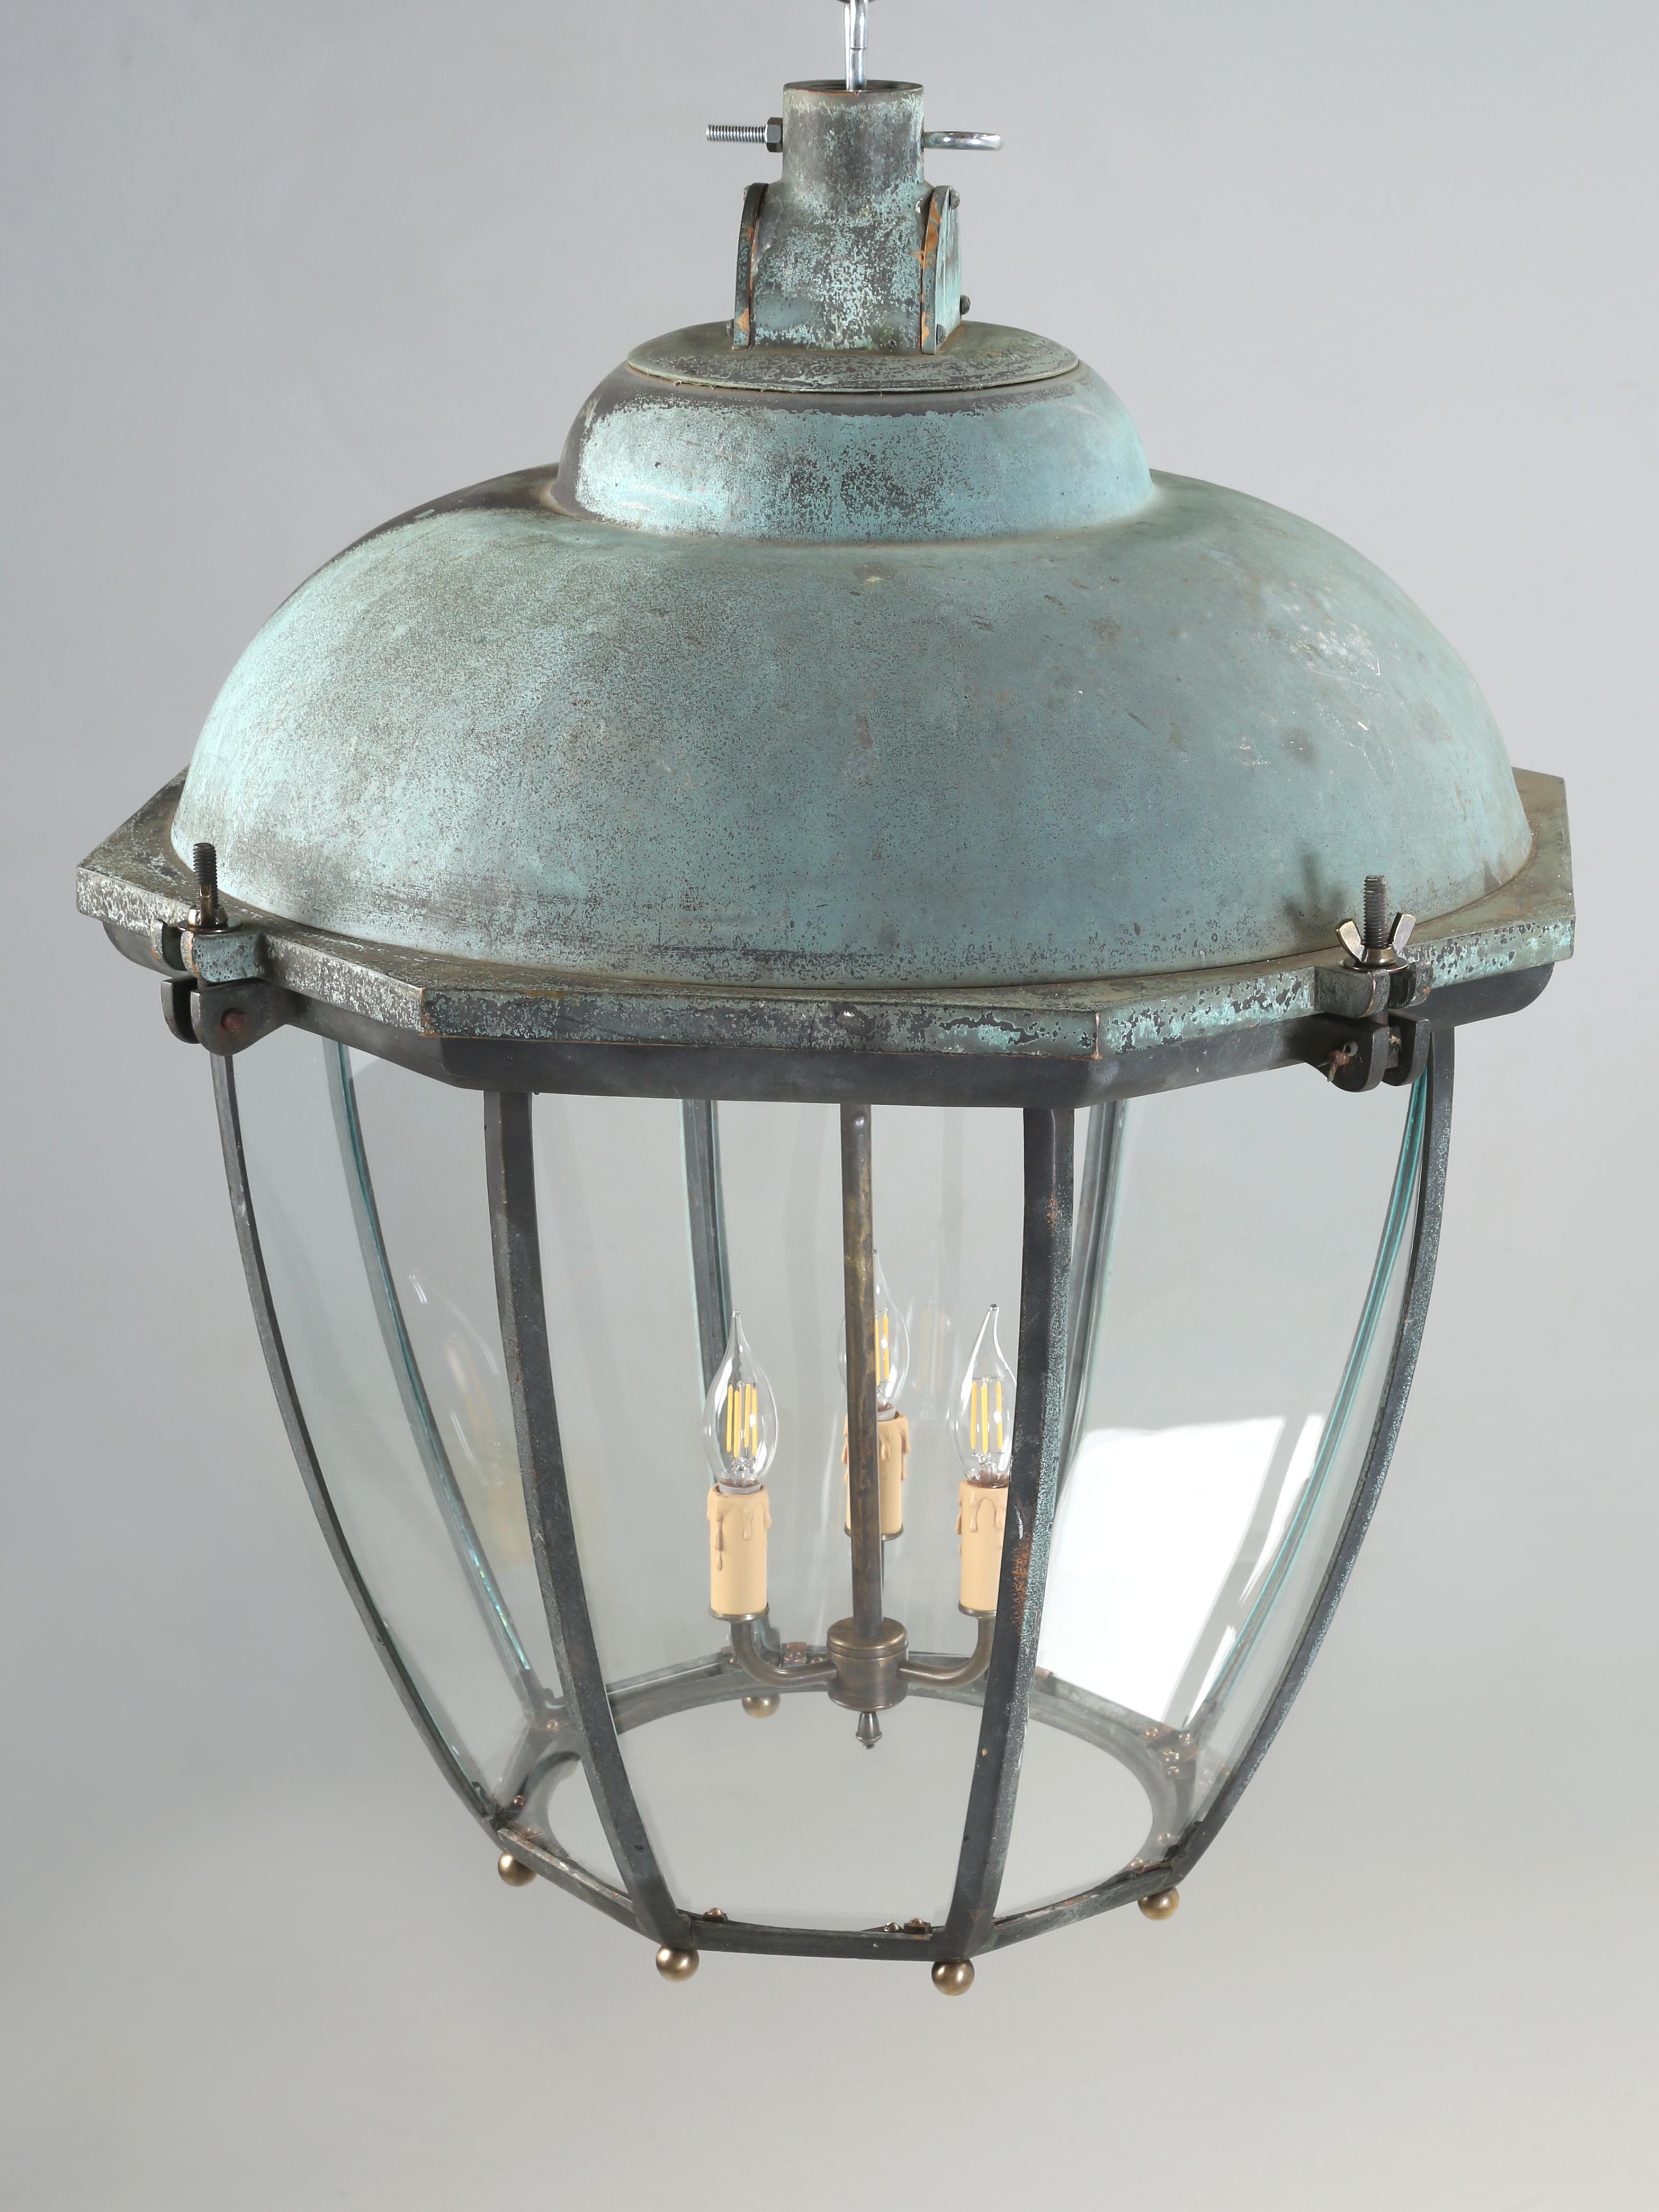 Country Bronze and Copper Lantern or Pendant Dublin Ireland Beautifully 1930's (5) Avail